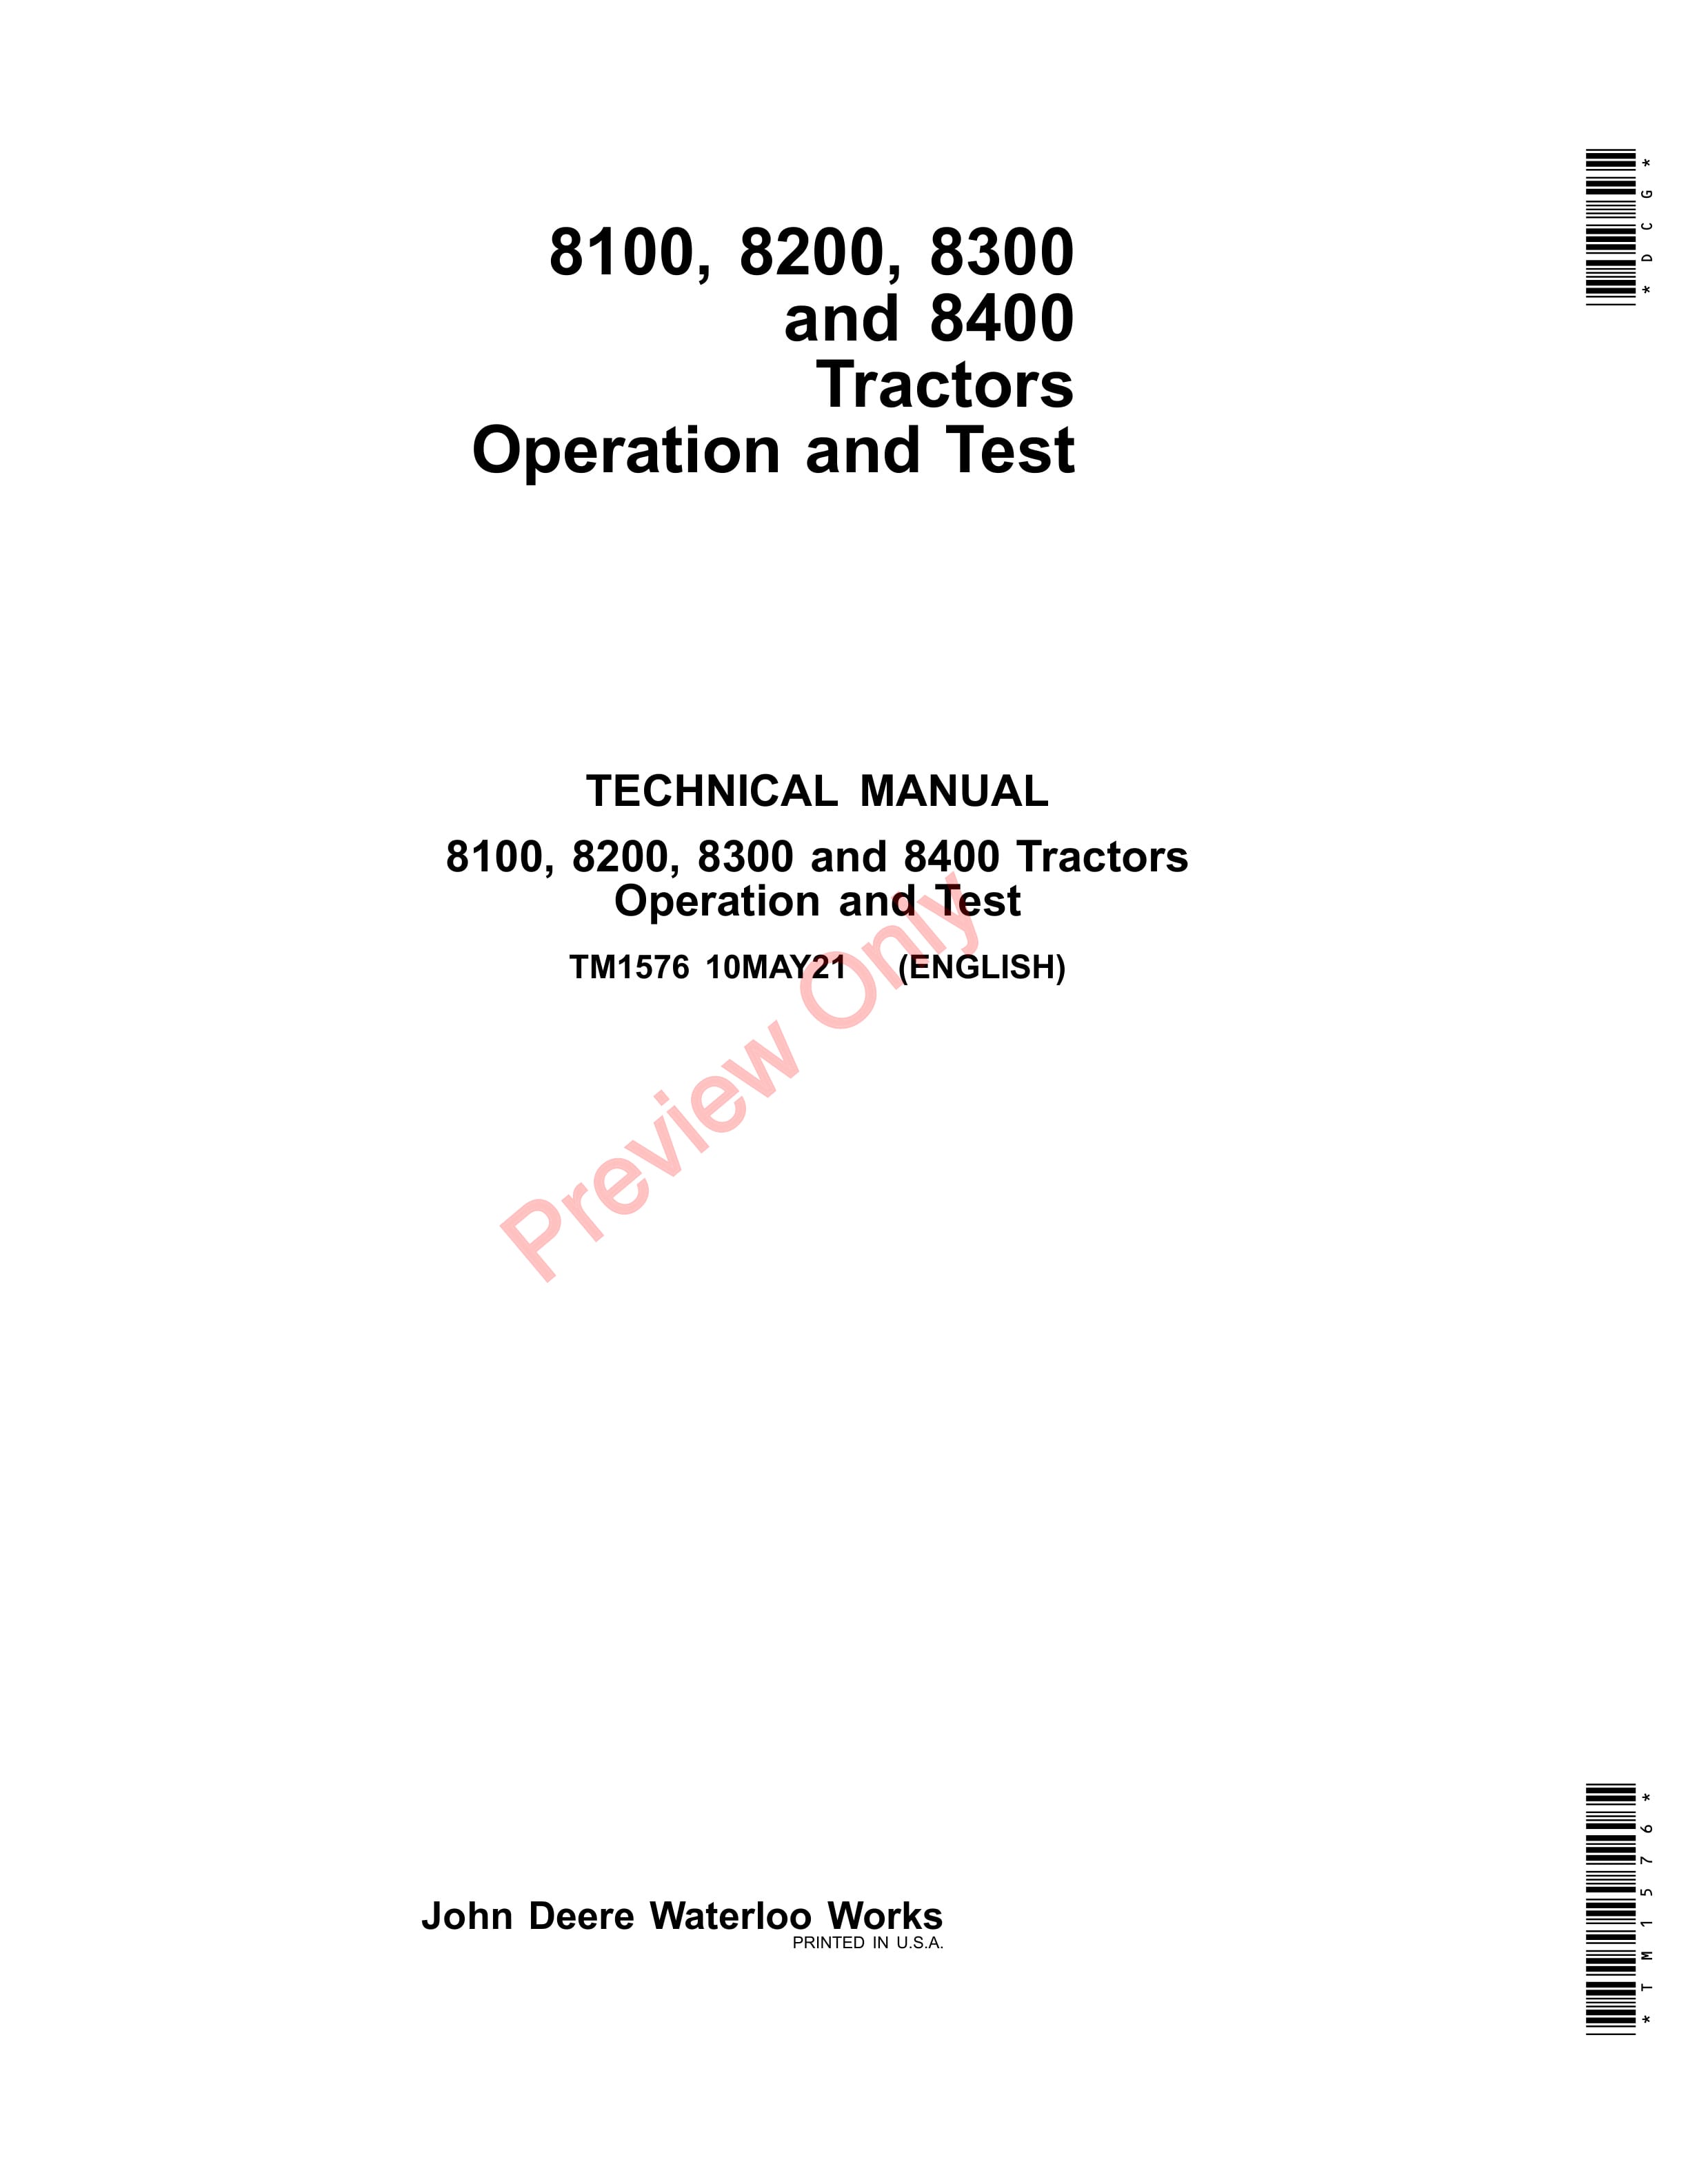 John Deere 8100 8200 8300 and 8400 Tractors Operation and Test Technical Manual TM1576 10MAY21 PDF